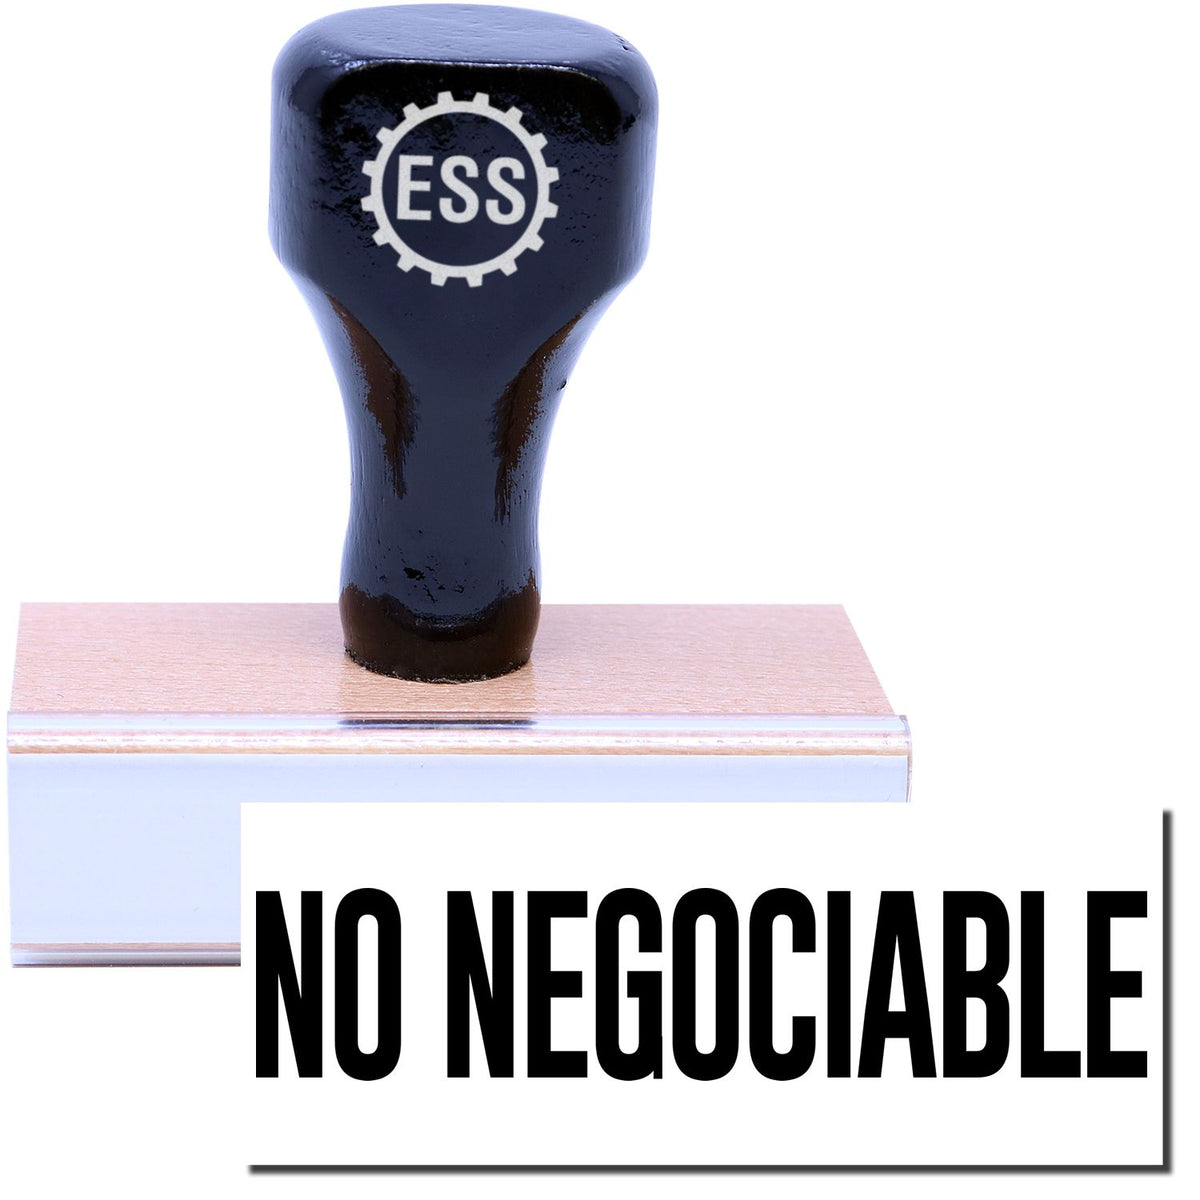 A stock office rubber stamp with a stamped image showing how the text &quot;NO NEGOCIABLE&quot; is displayed after stamping.